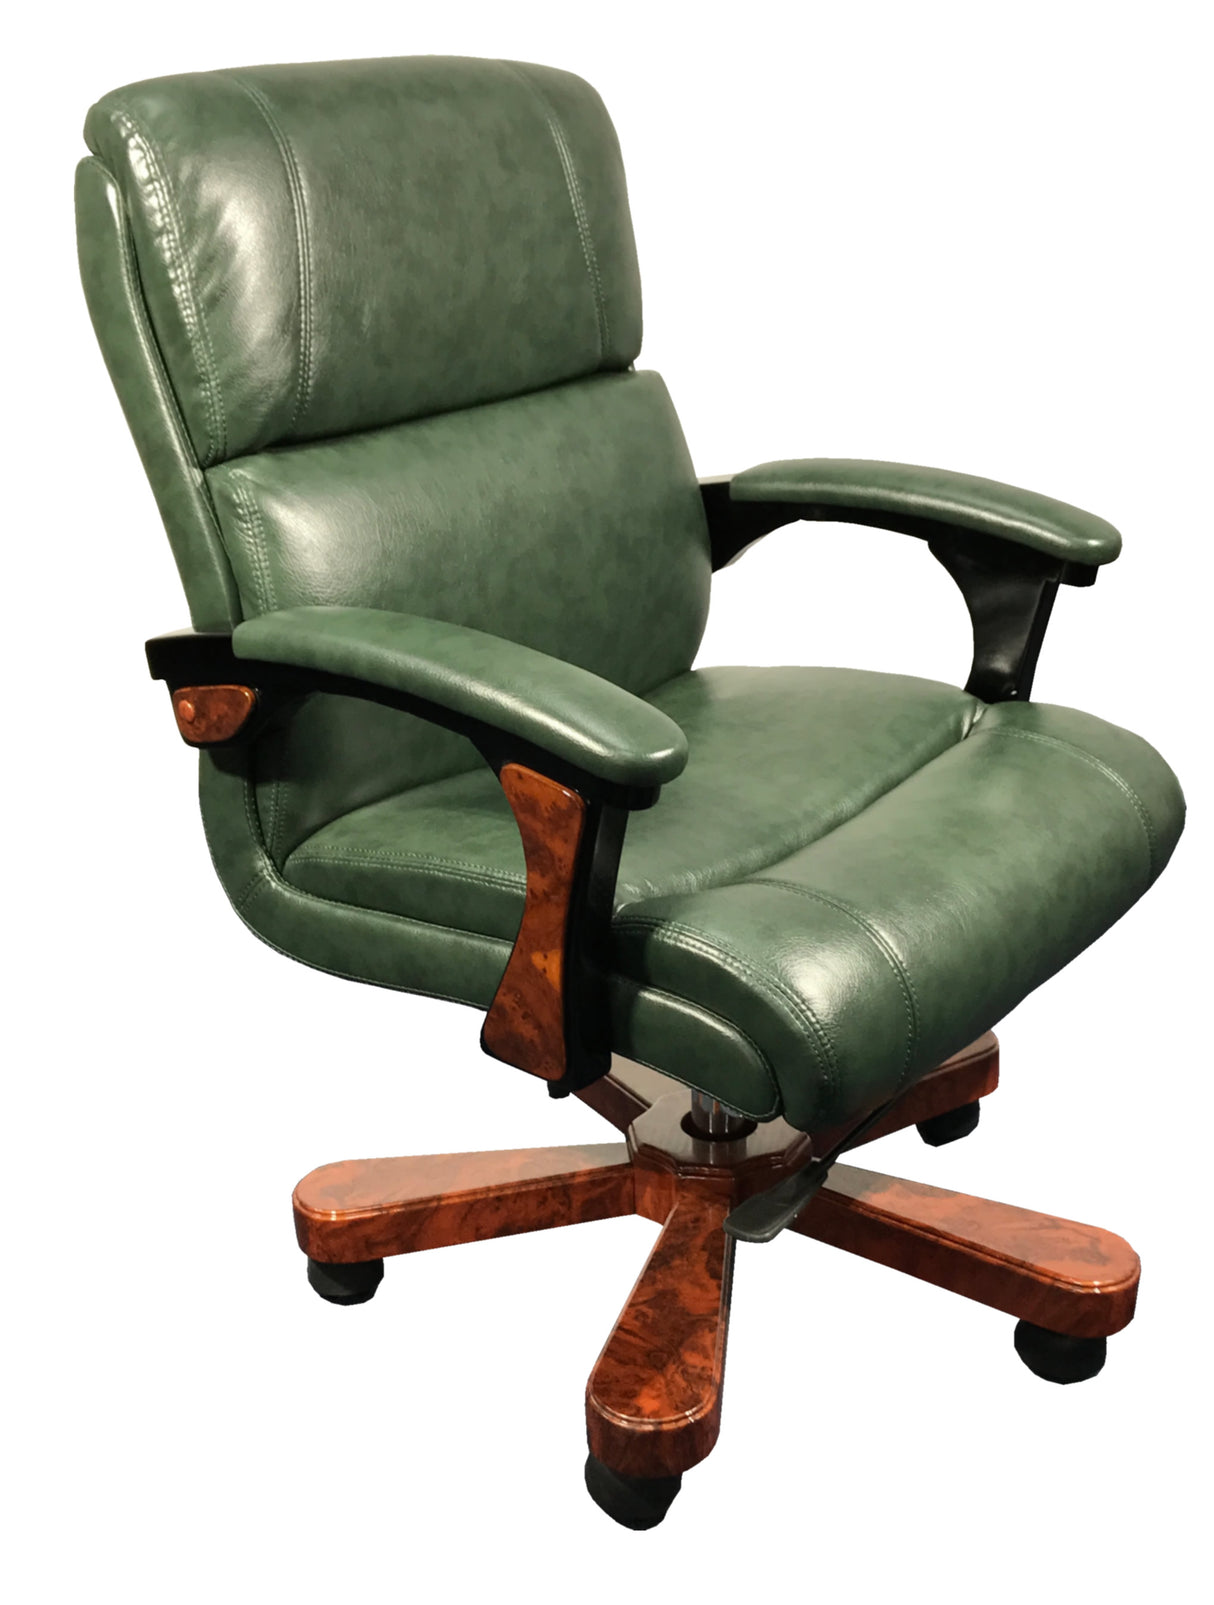 Luxury Executive Style Office Chair in Green Leather - B018